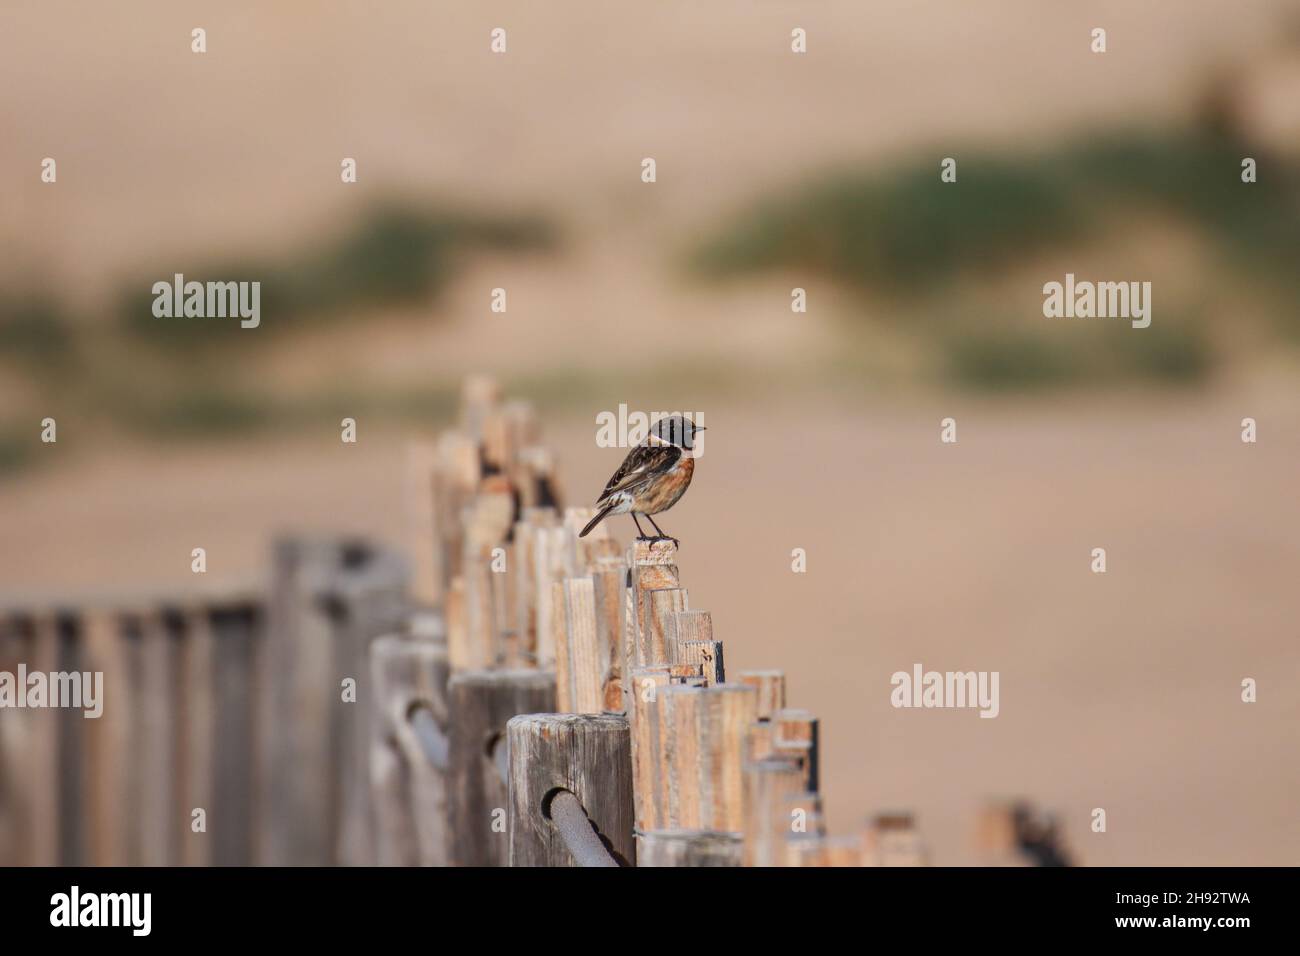 European Stonechat on a wood fence. Wildlife scene from nature Stock Photo